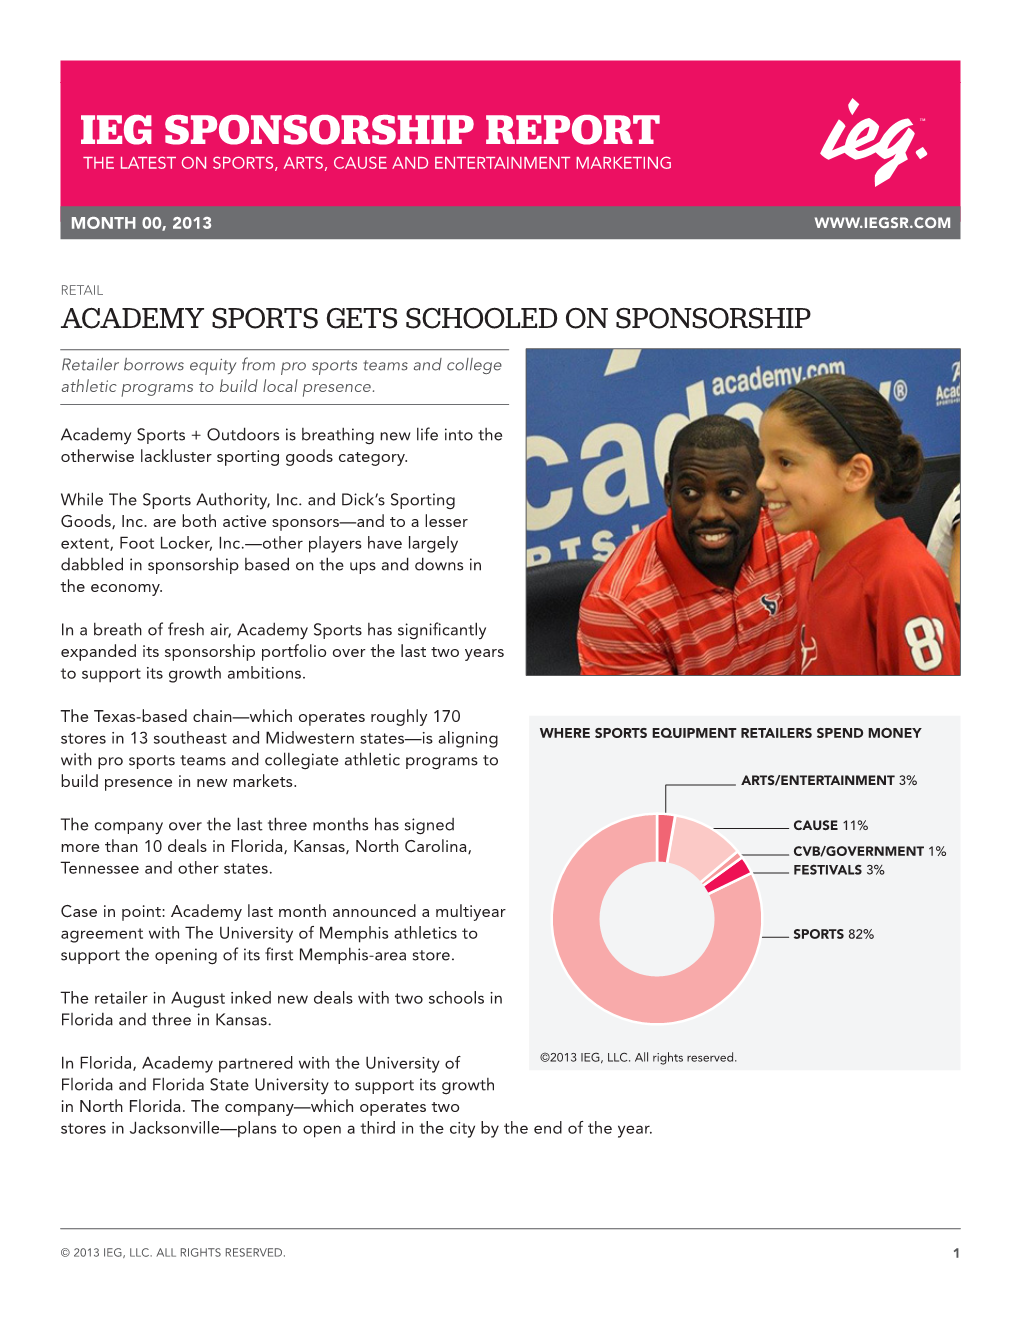 Ieg Sponsorship Report Ieg Sponsorship Report the Latest on Sports, Arts, Cause and Entertainment Marketing